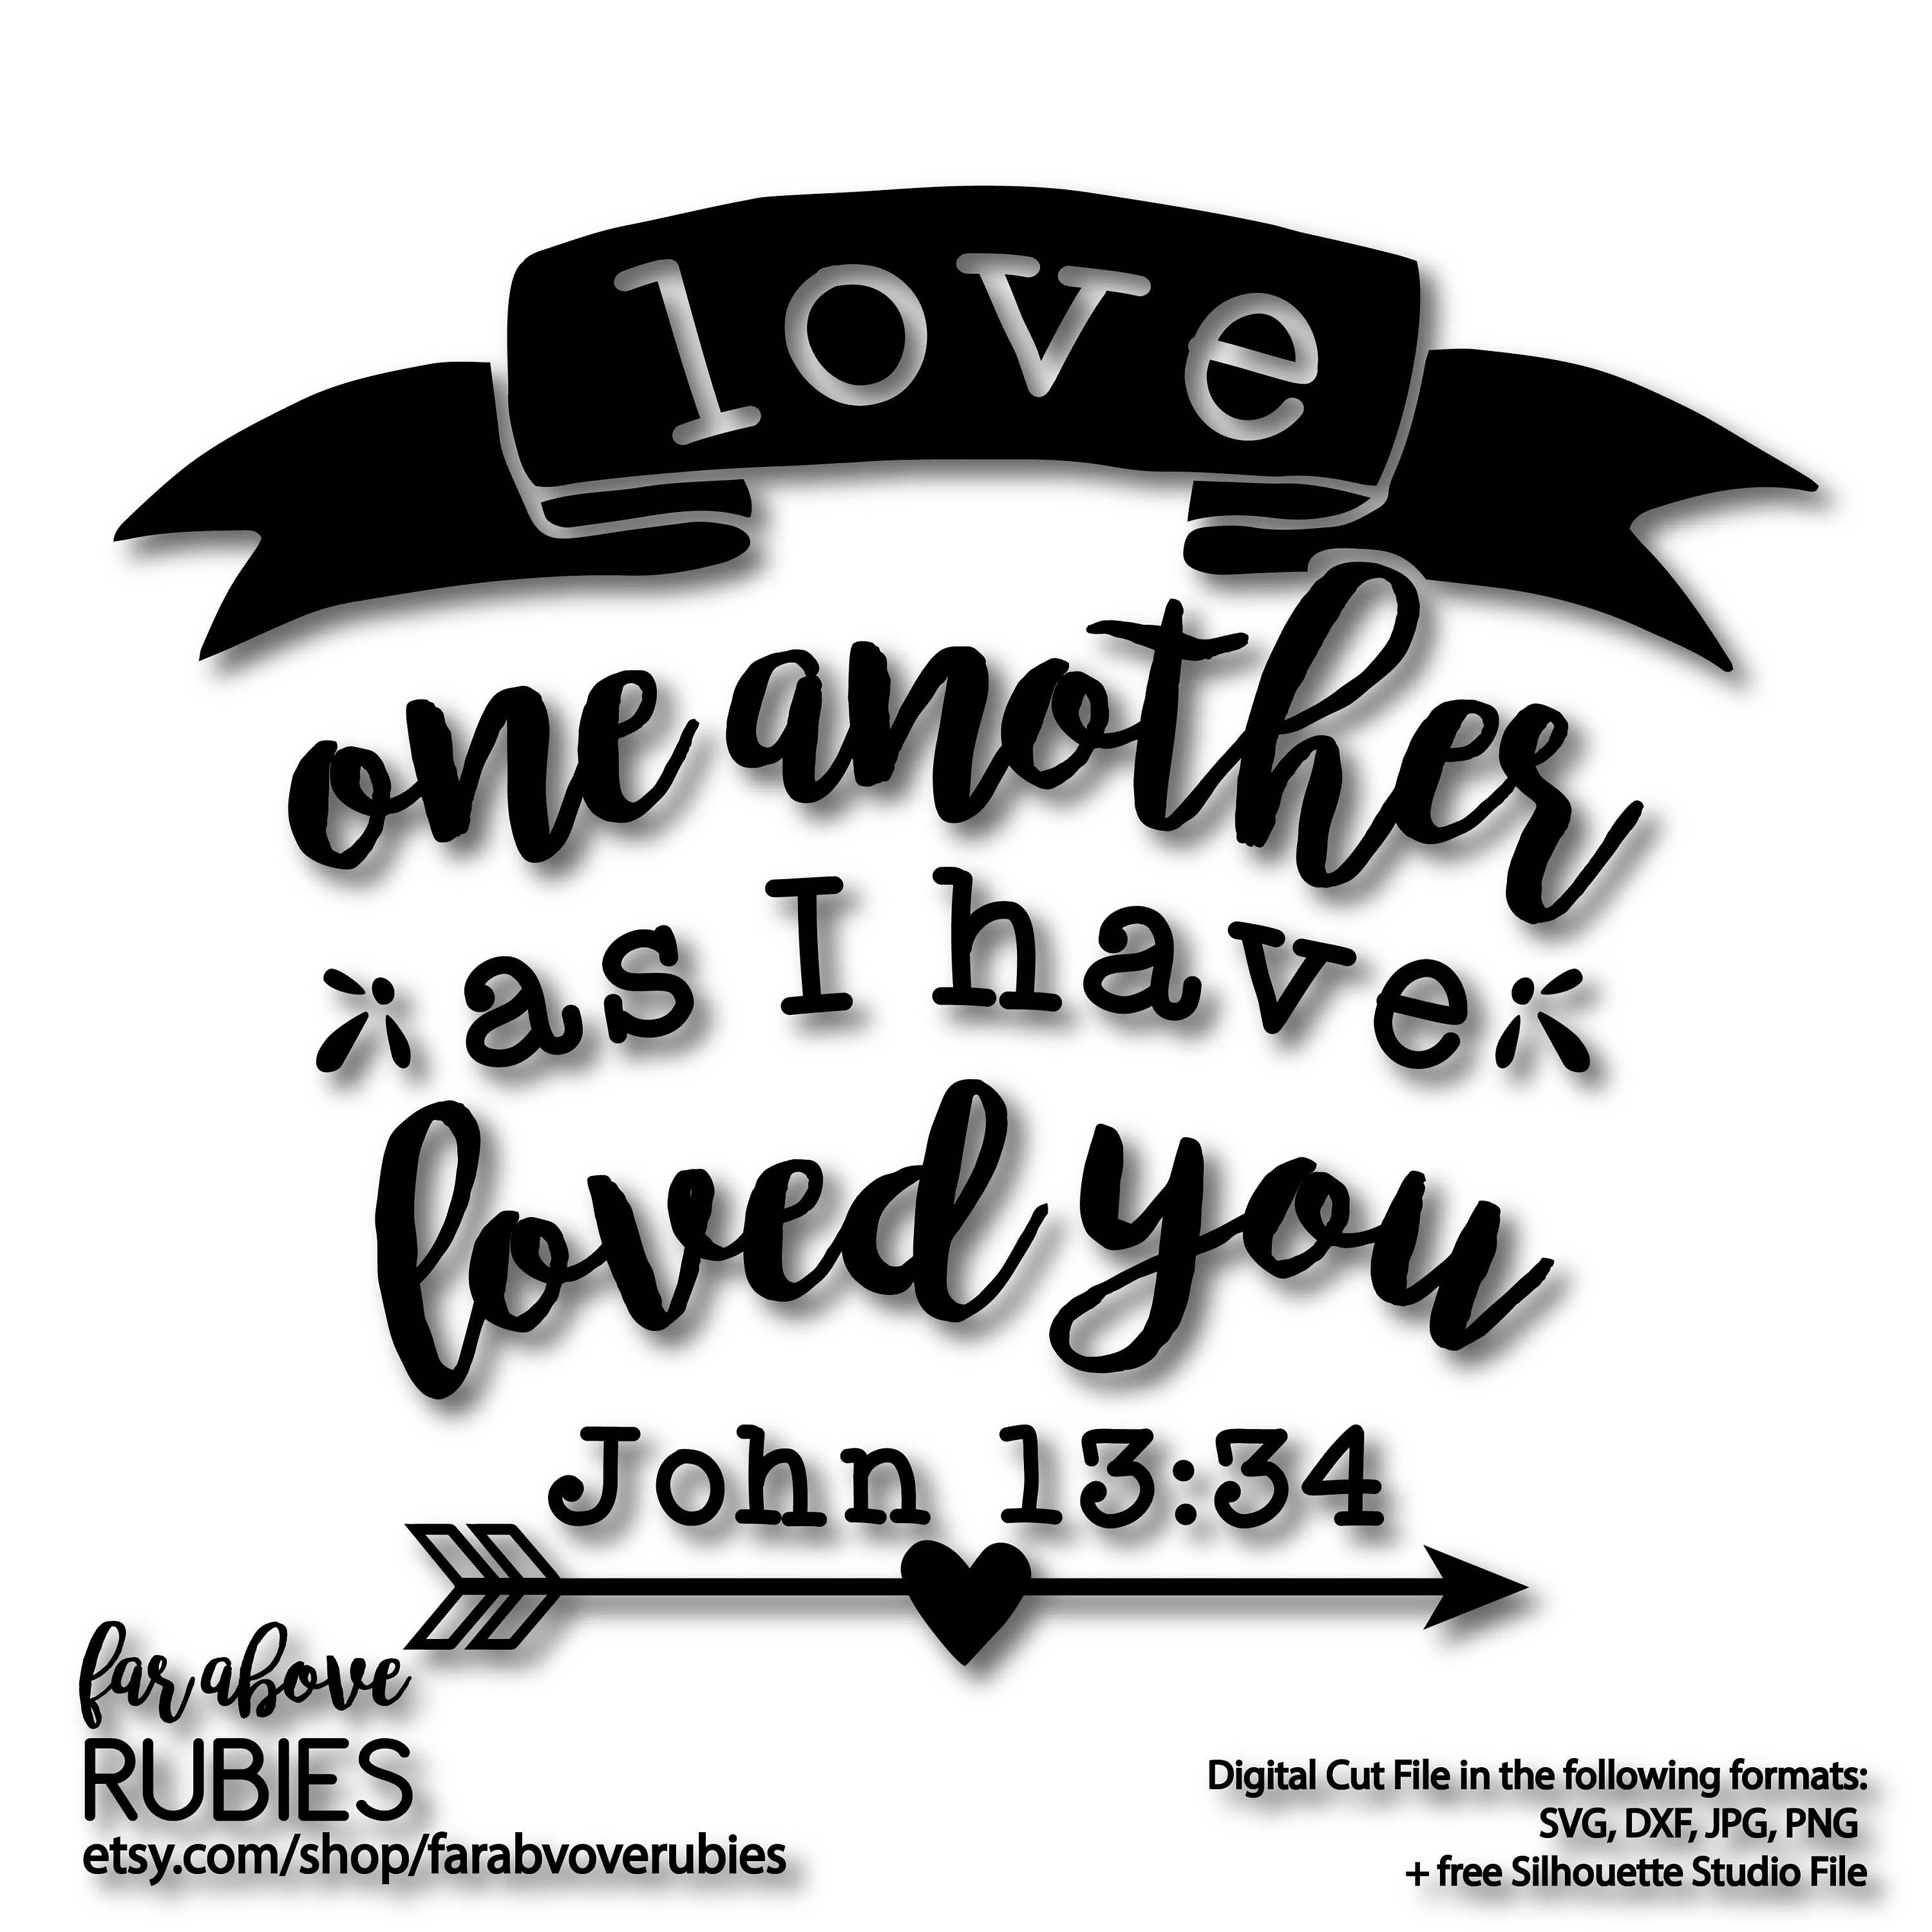 love one another bible verse friends